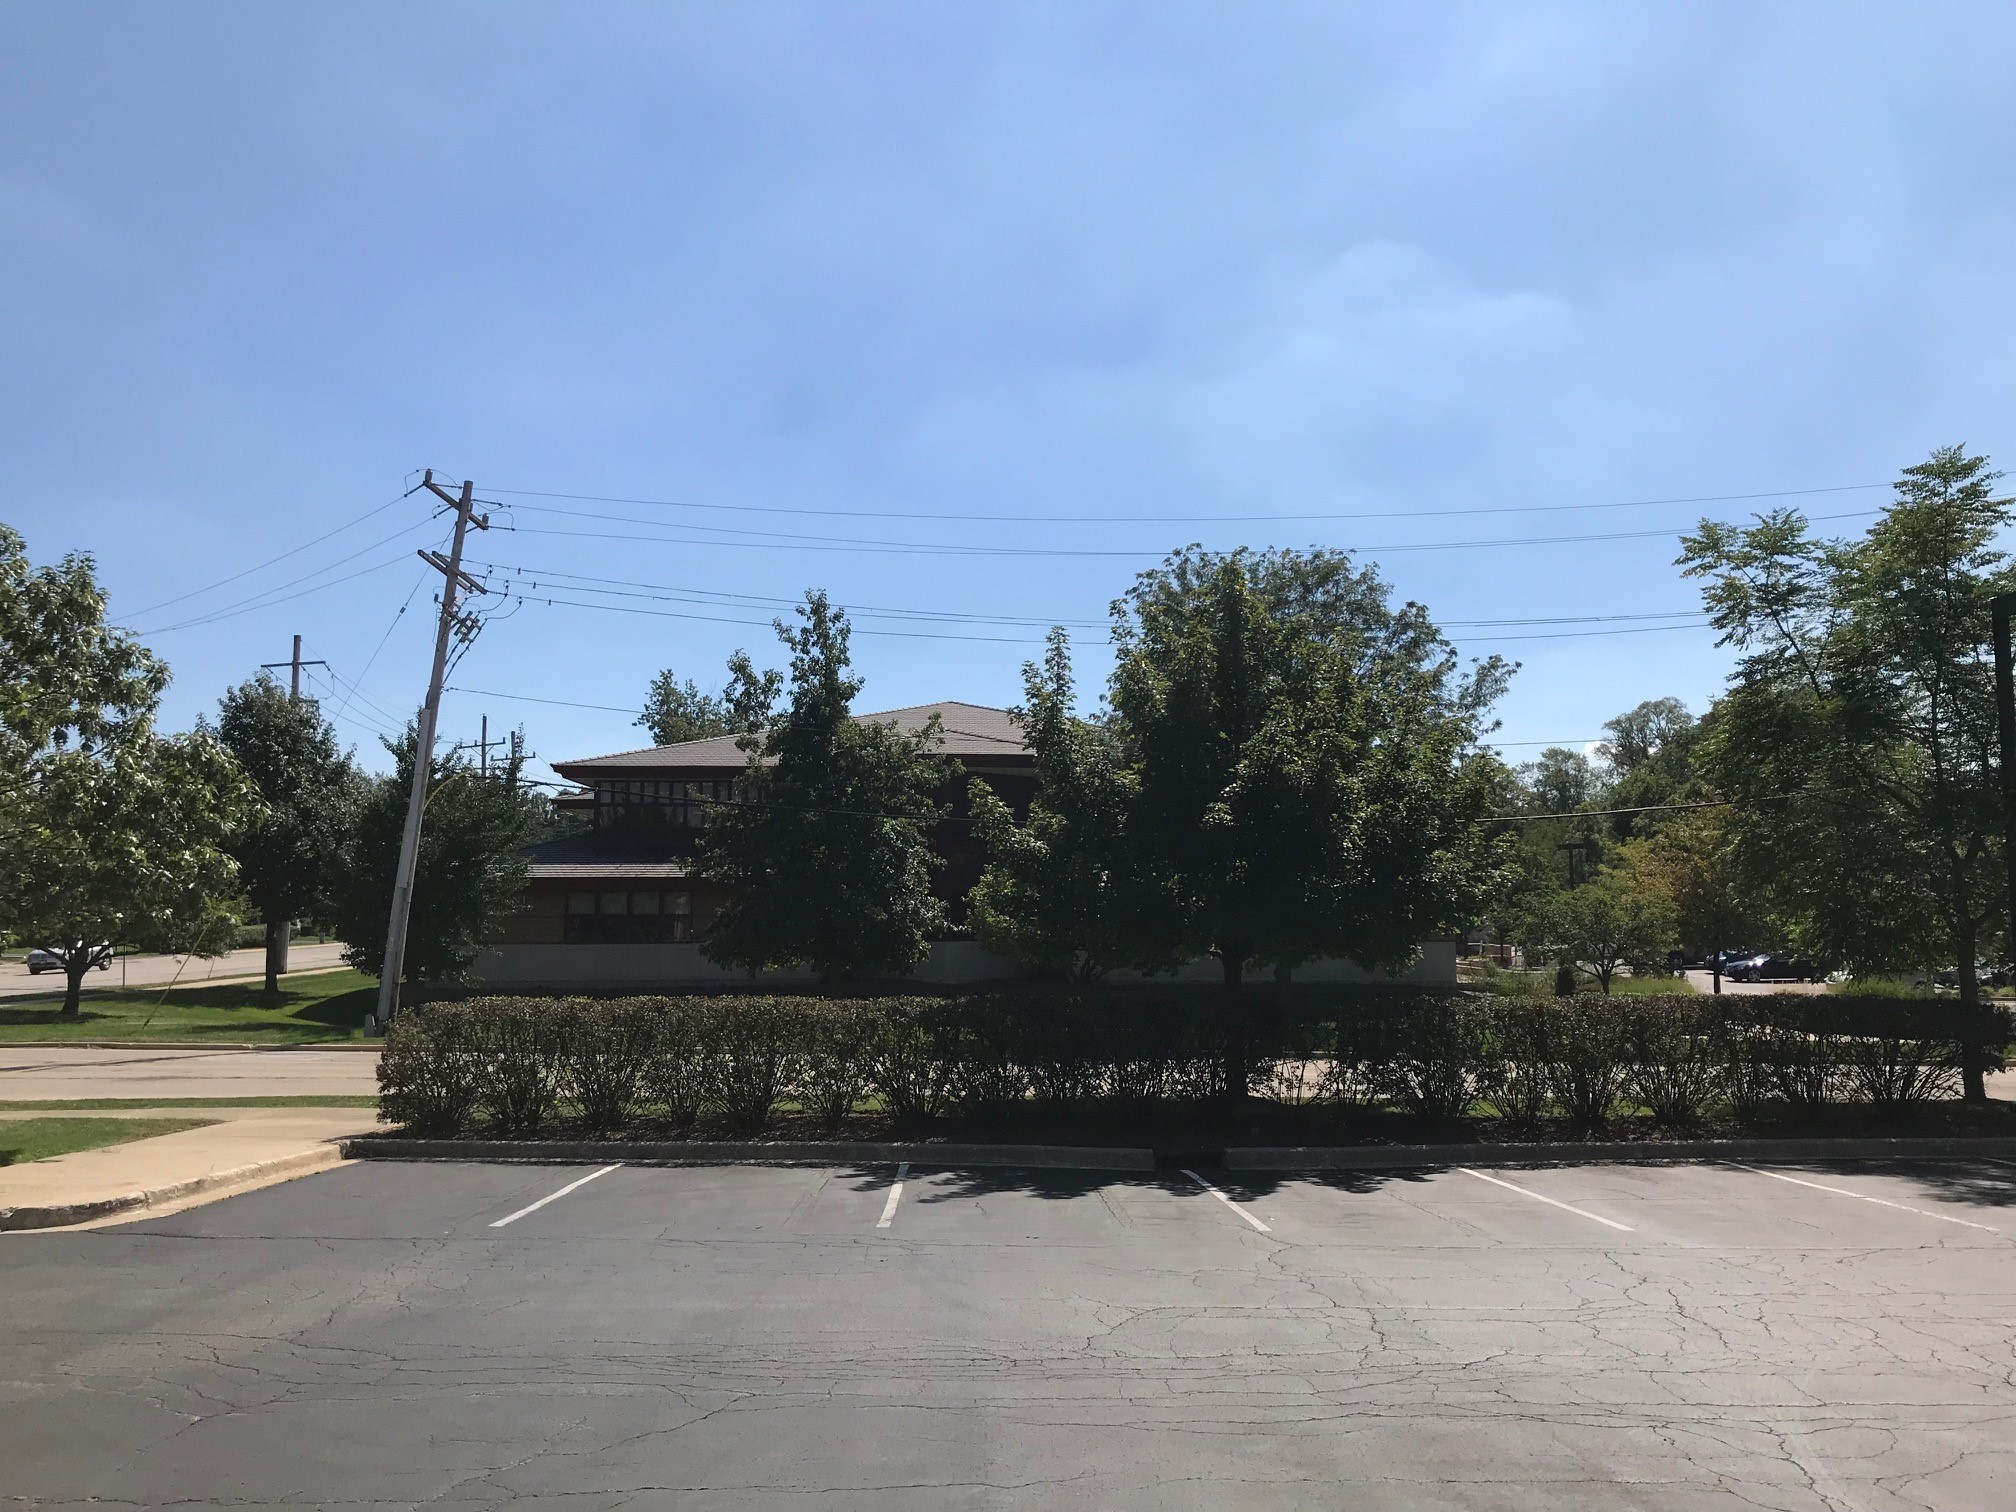 “The Westmont Public Library” by S.M. O’Connor – In the Garden City